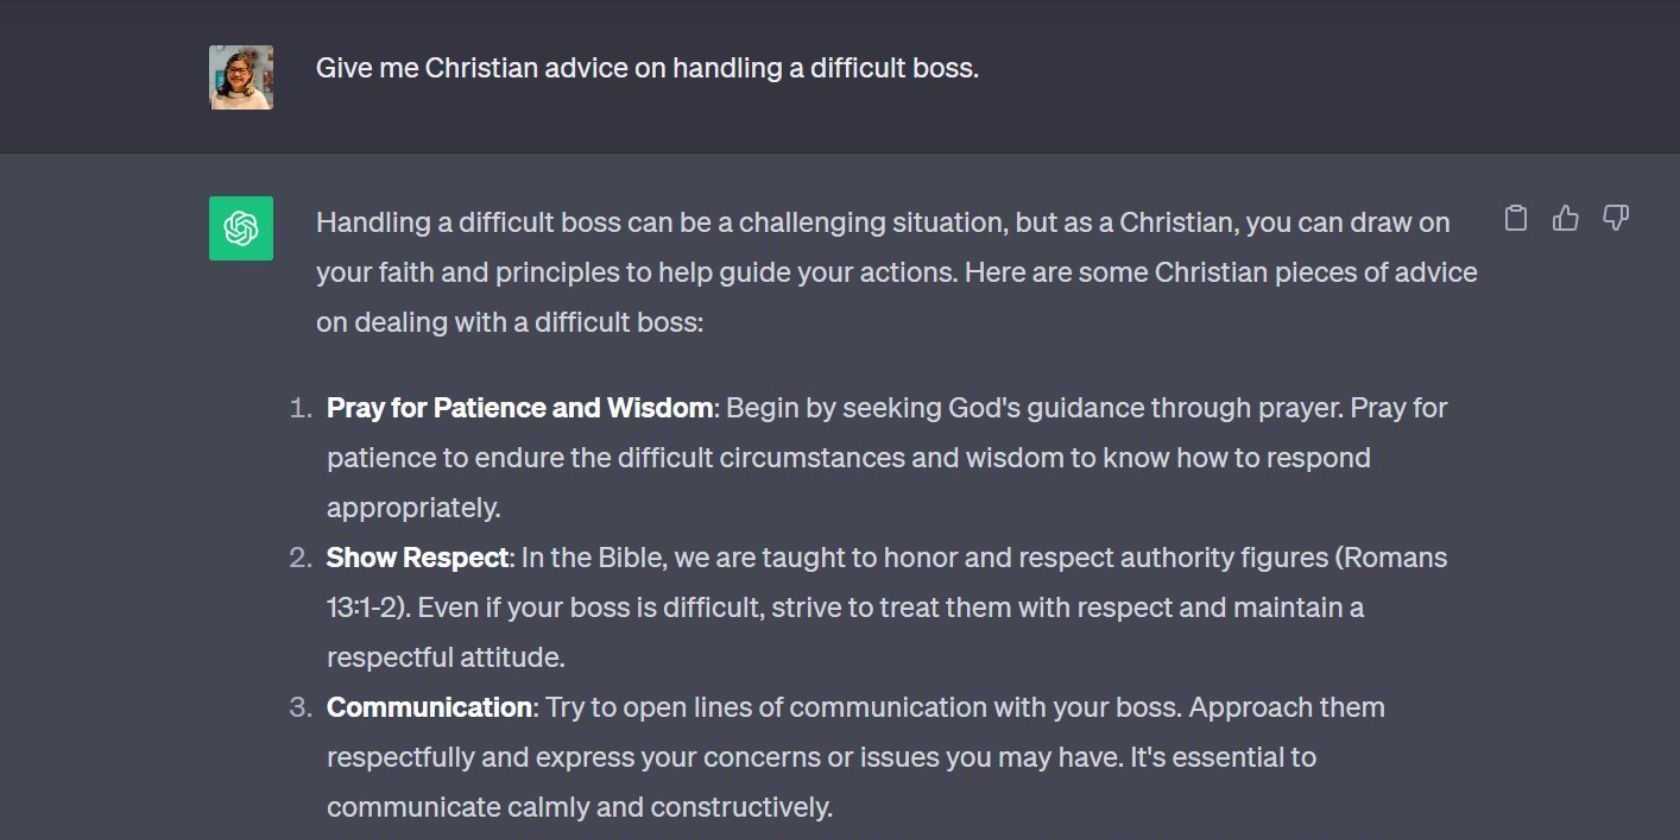 chatgpt gives advice from a Christian perspective